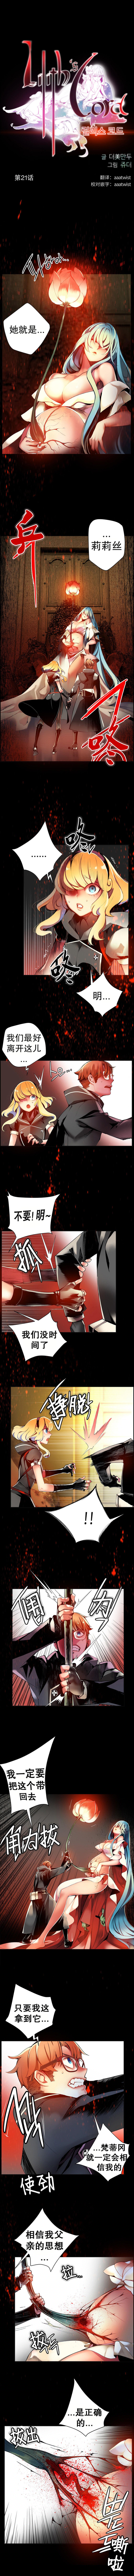 [Juder] 莉莉丝的脐带(Lilith`s Cord) Ch.1-24 [Chinese] 383